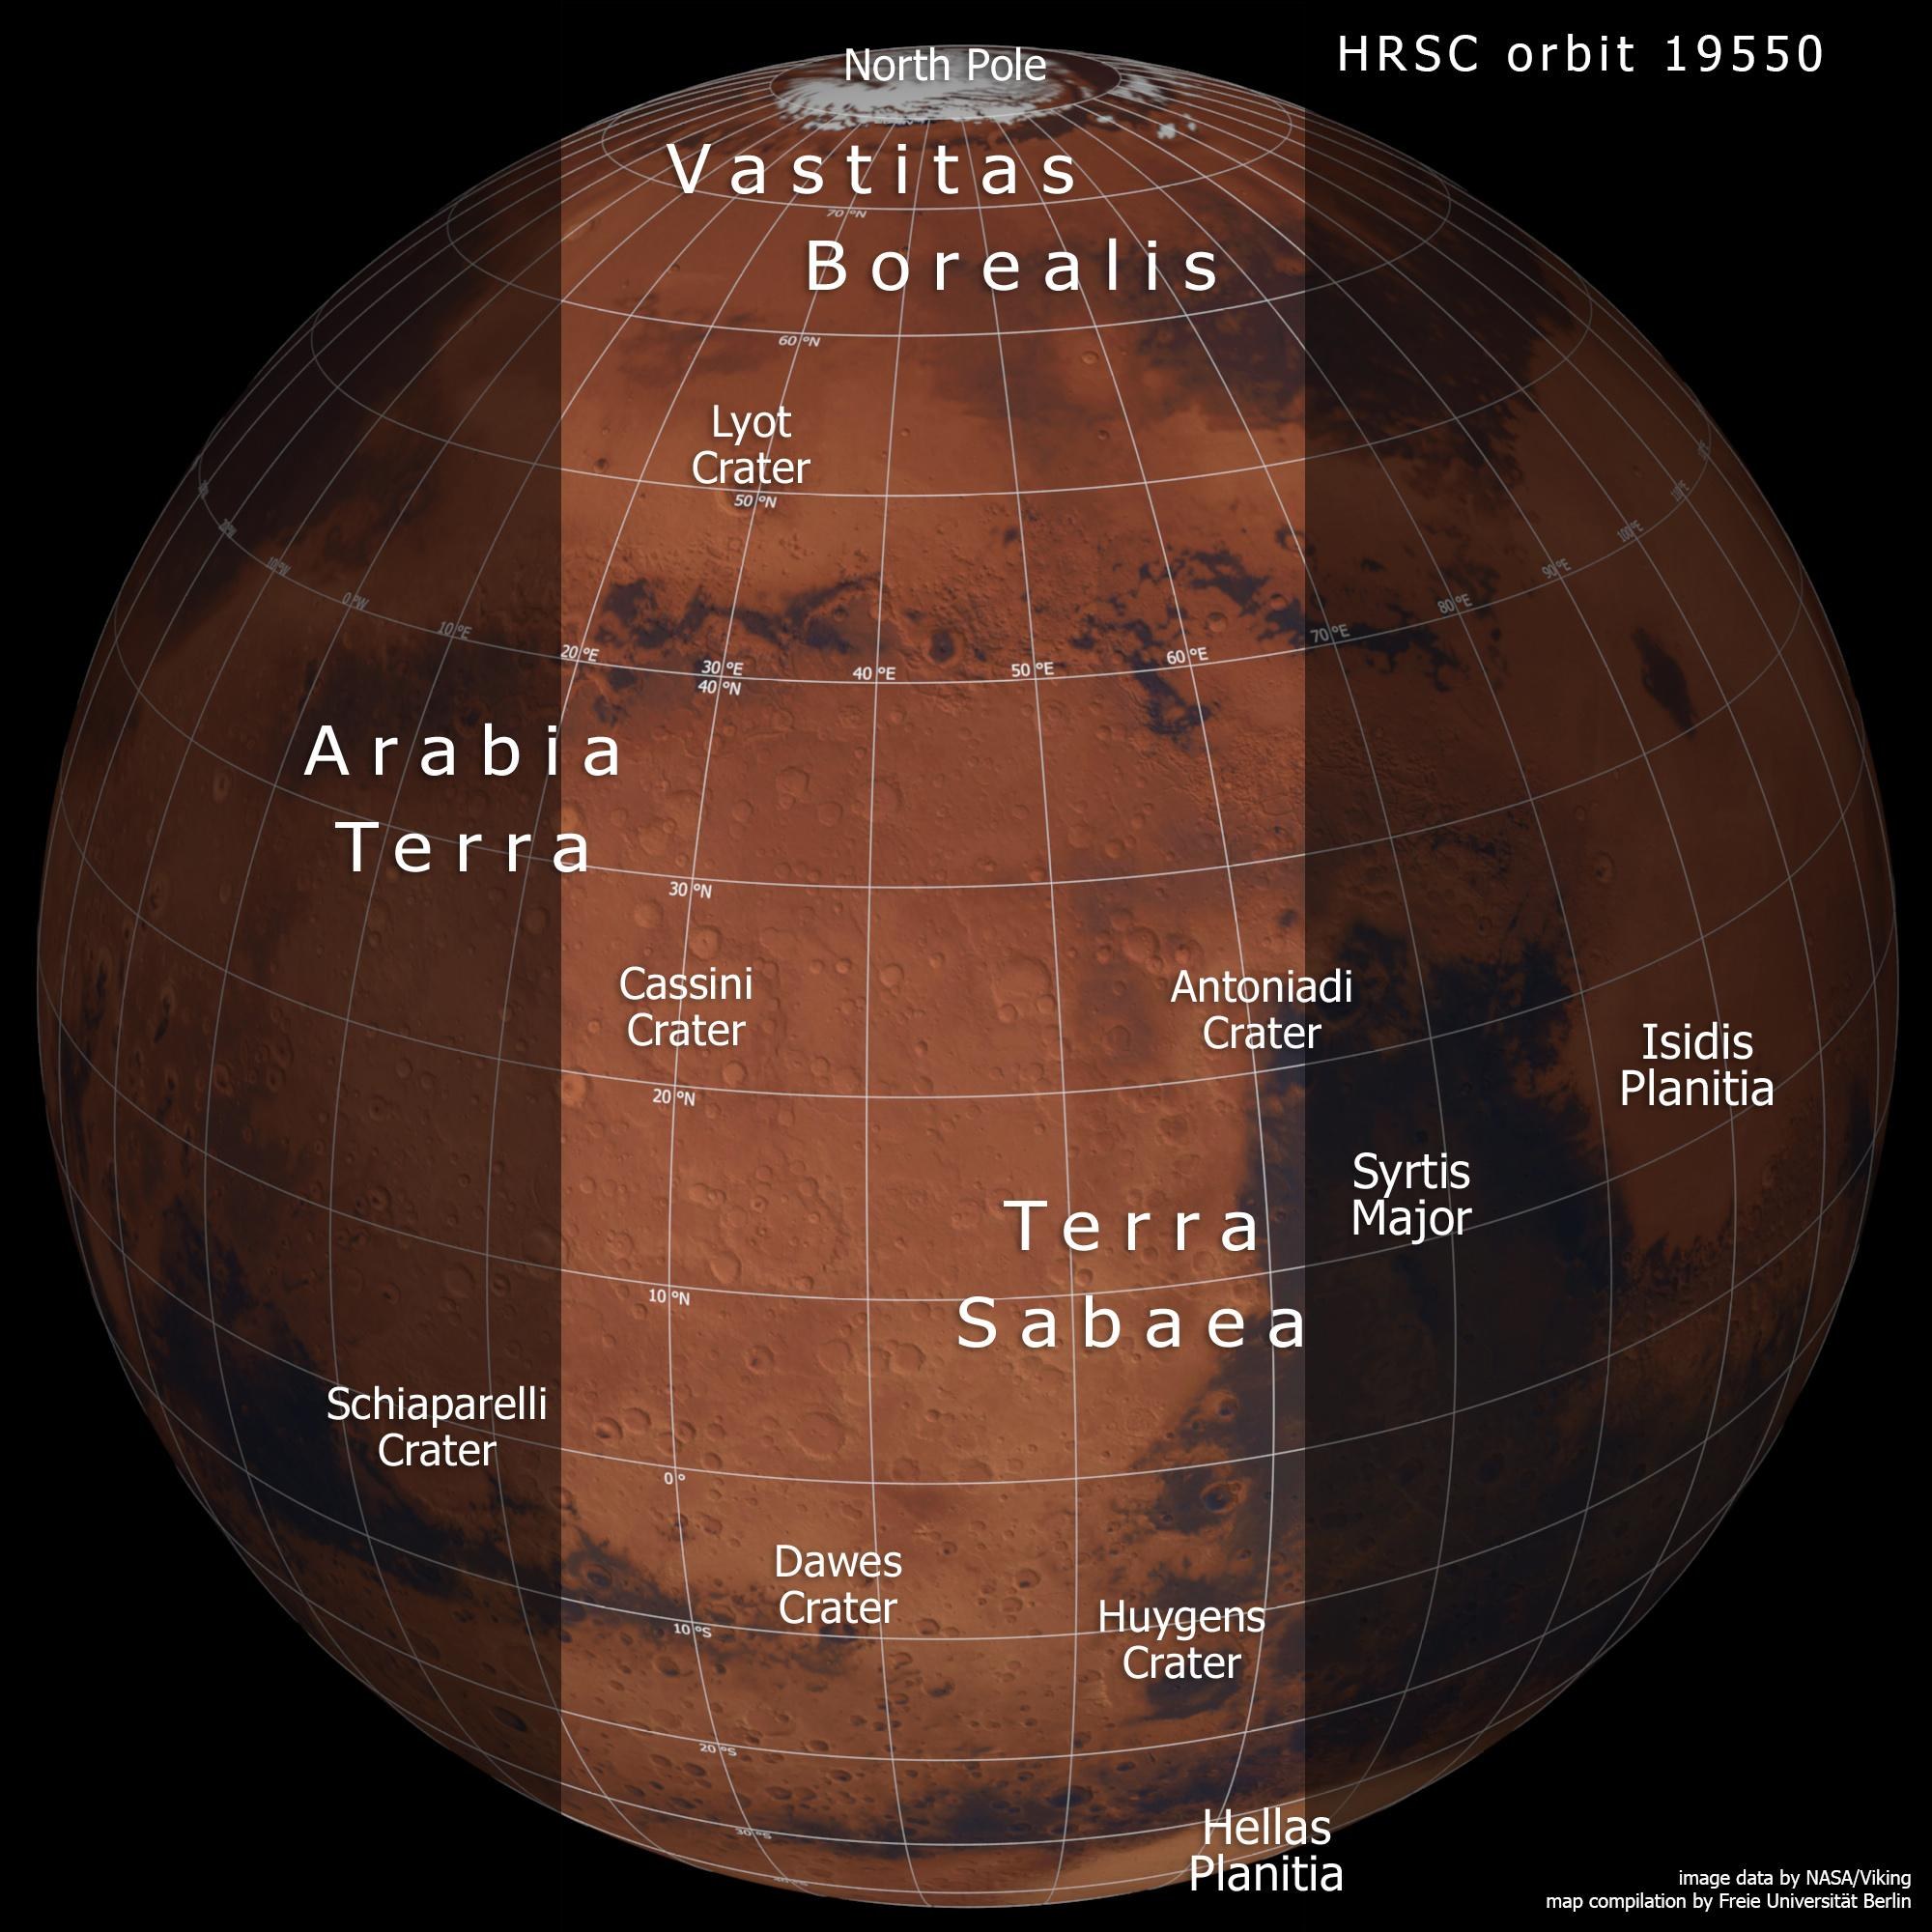 Mars, between 20 and 70 degrees east